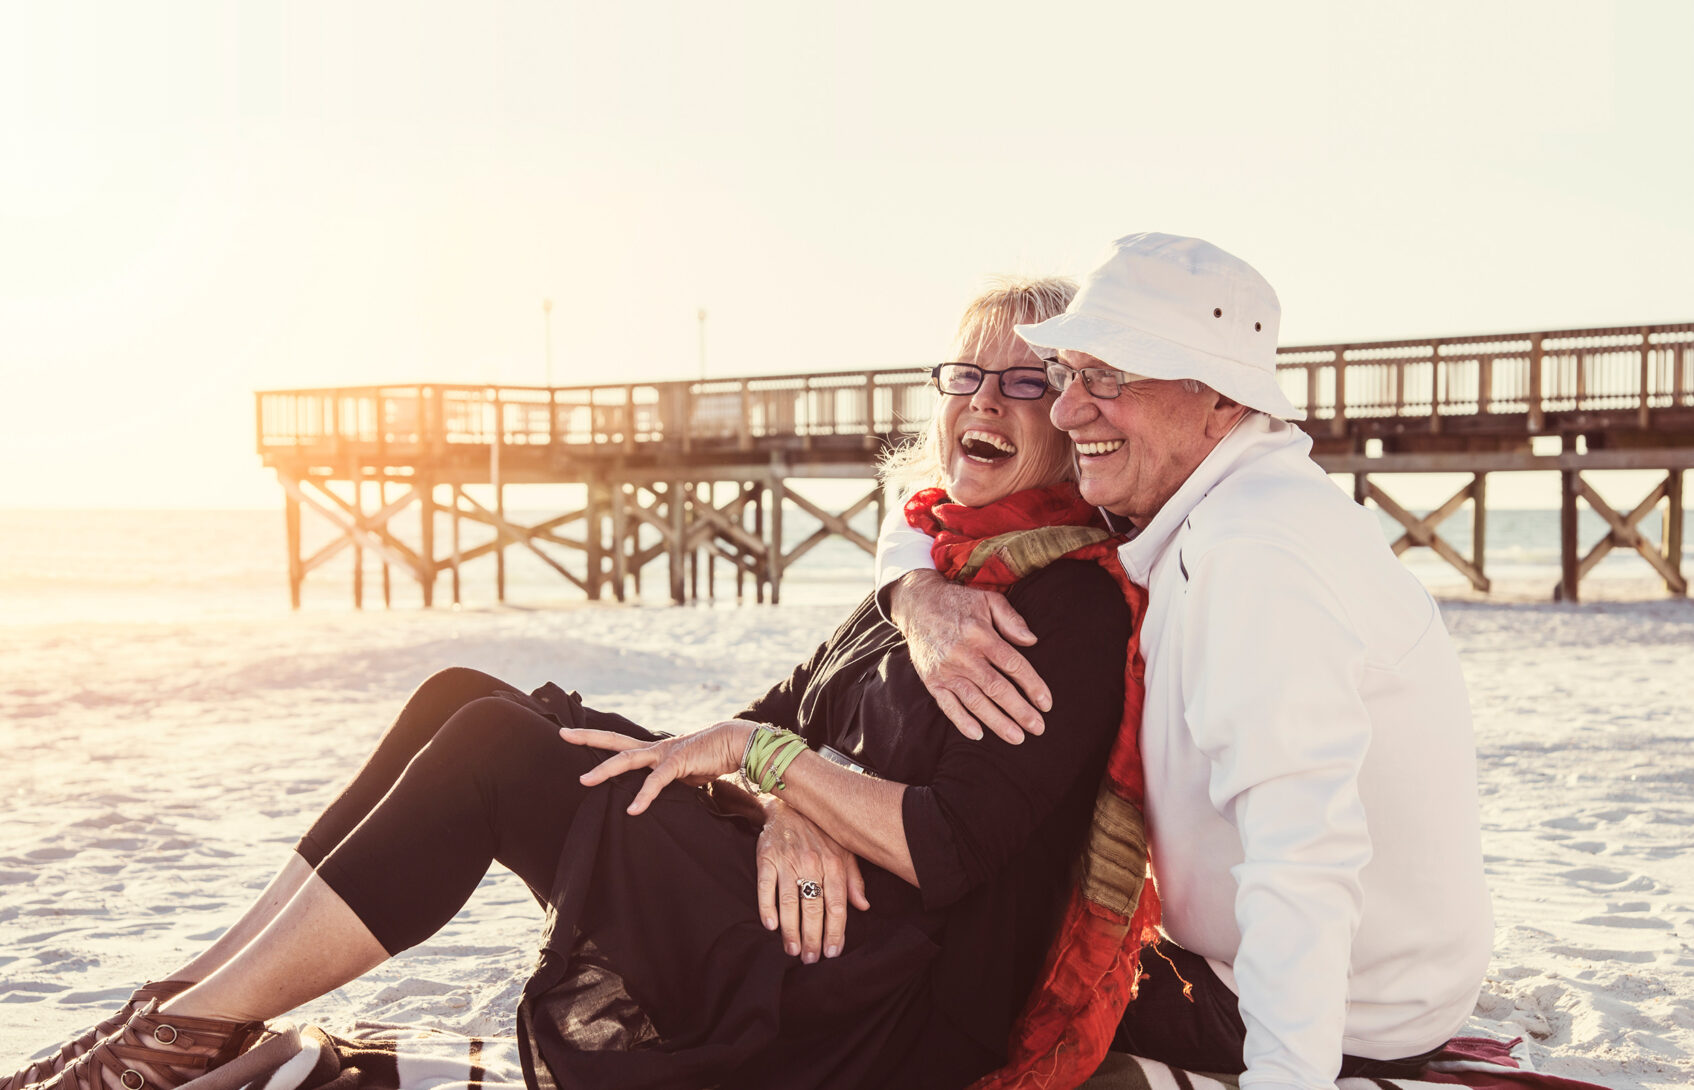 An older couple cuddles and smiles on a blanket by a pier